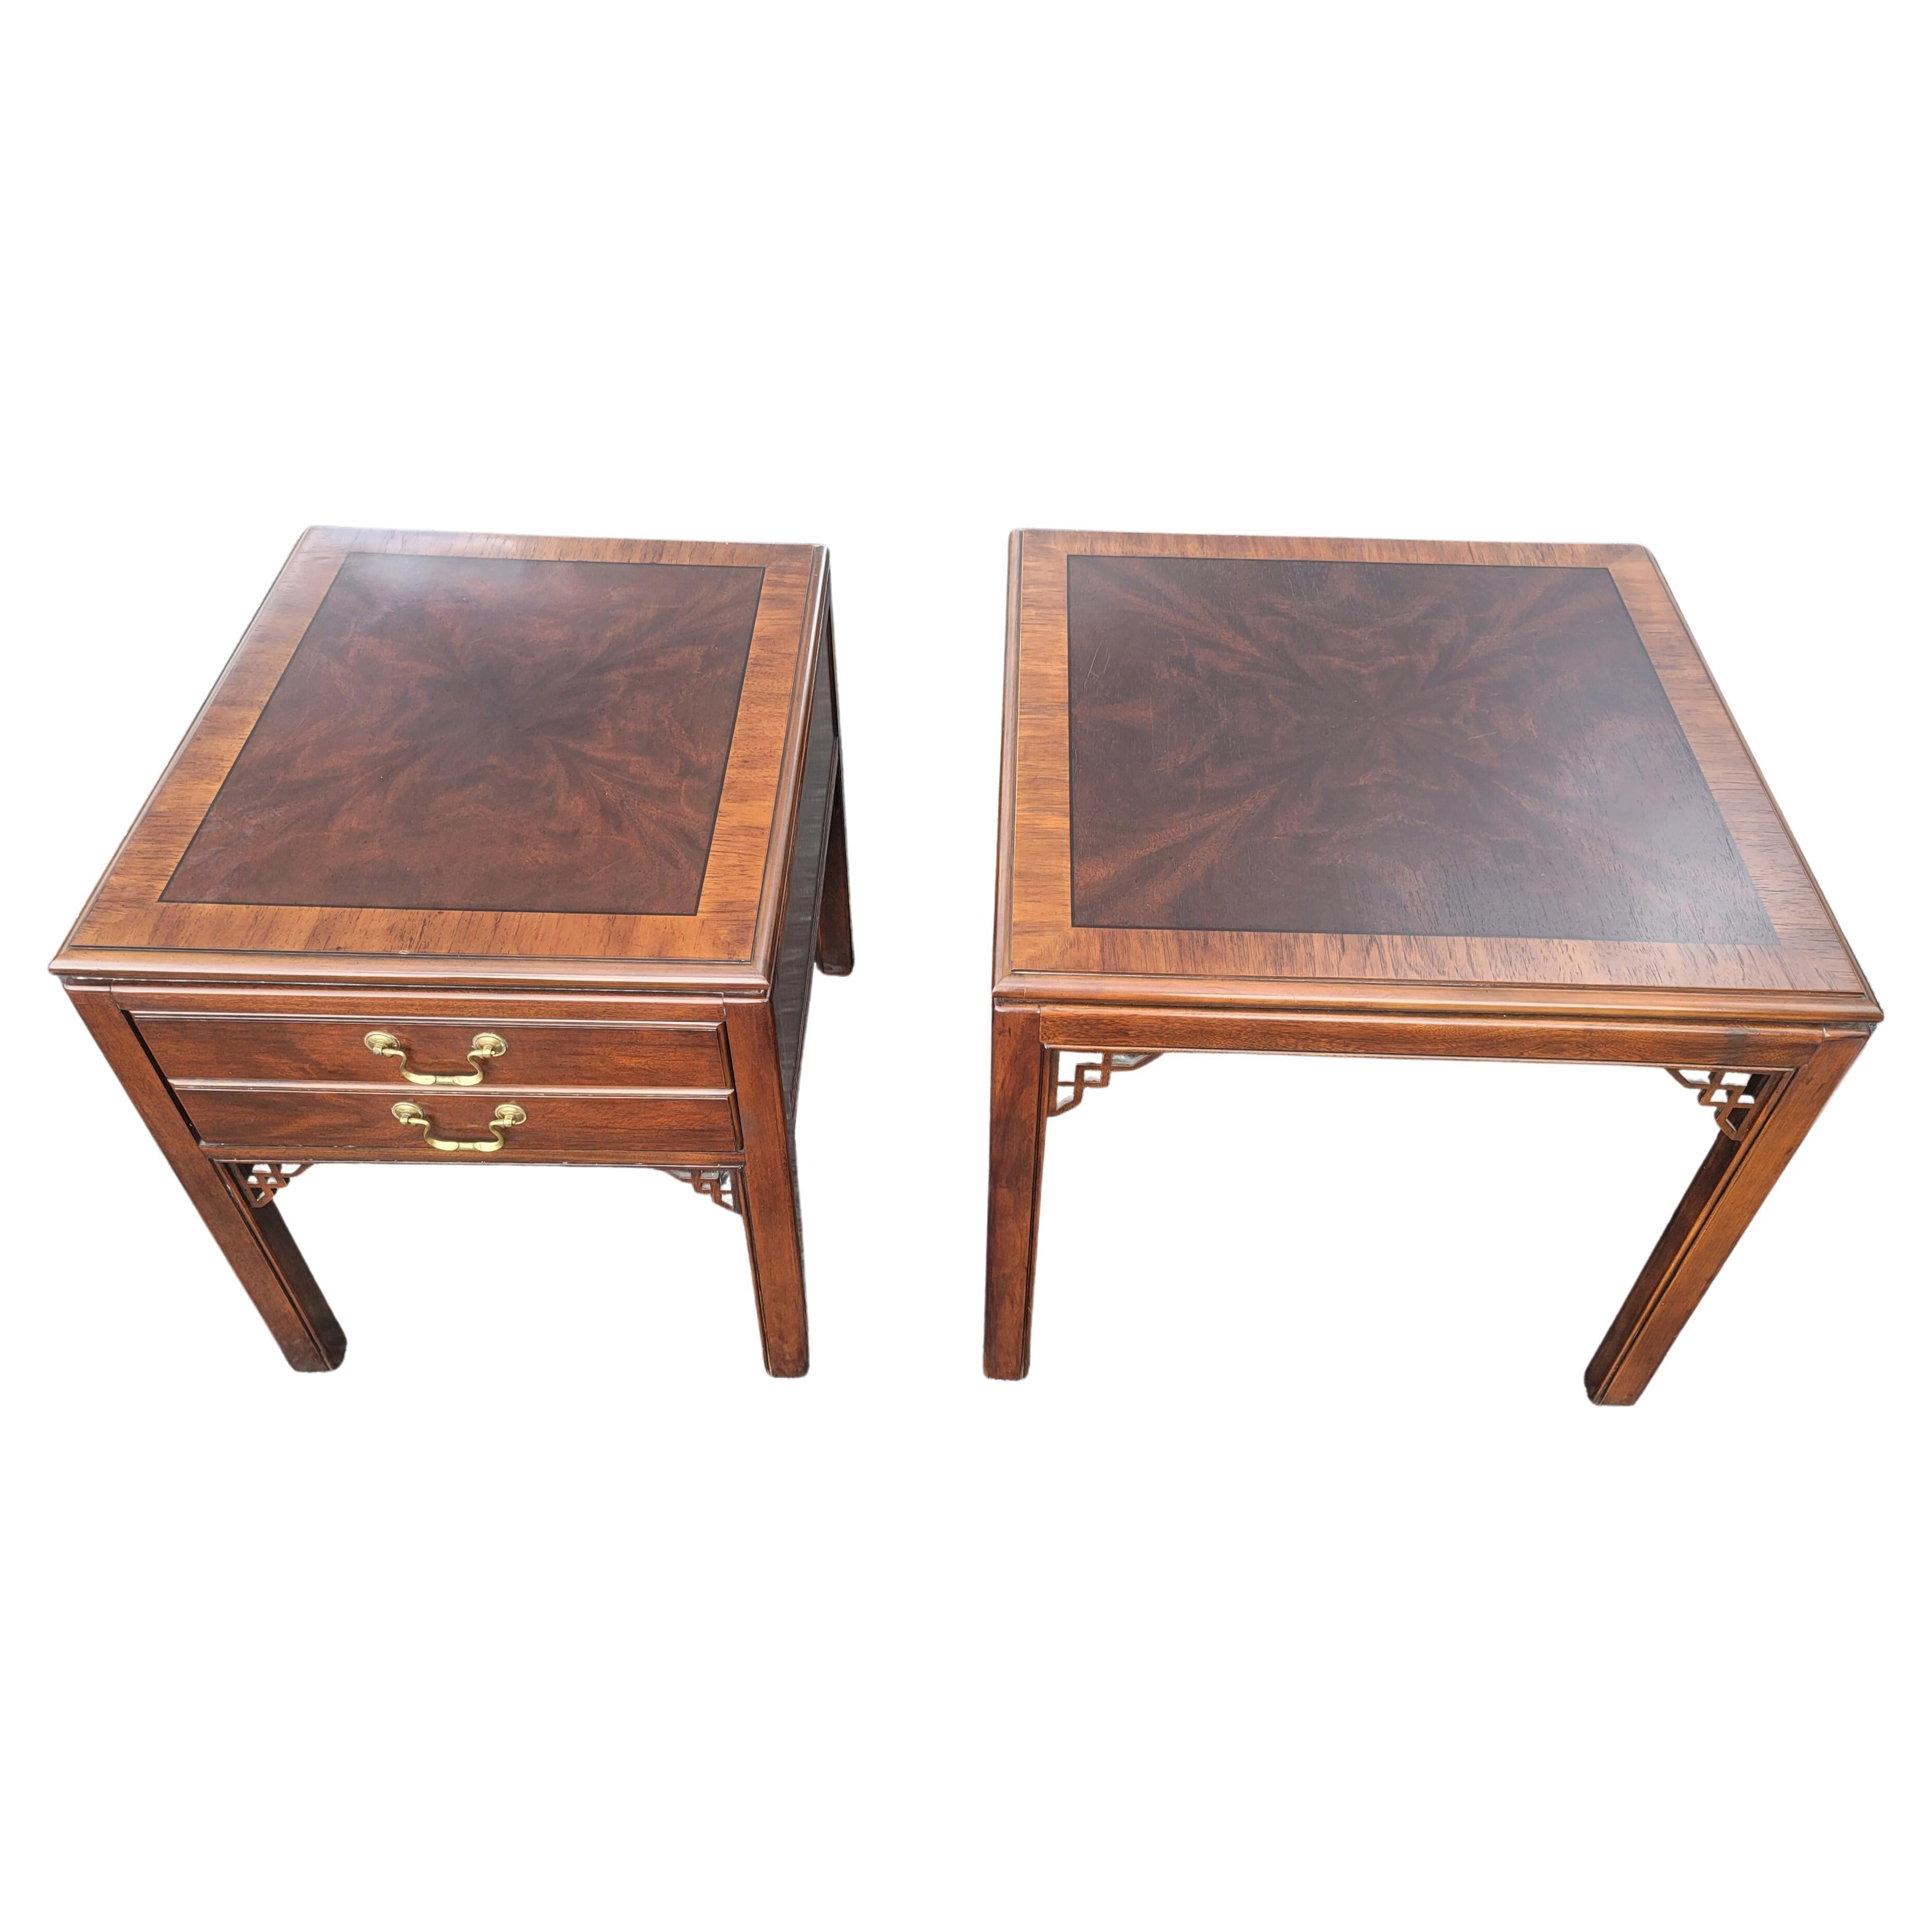 Beautiful Chippendale flame Mahogany side table with banded top. One table Features one large drawer with with two drop down drawer pulls. The second table is larger and without drawer. 
Table with drawer Measures 22